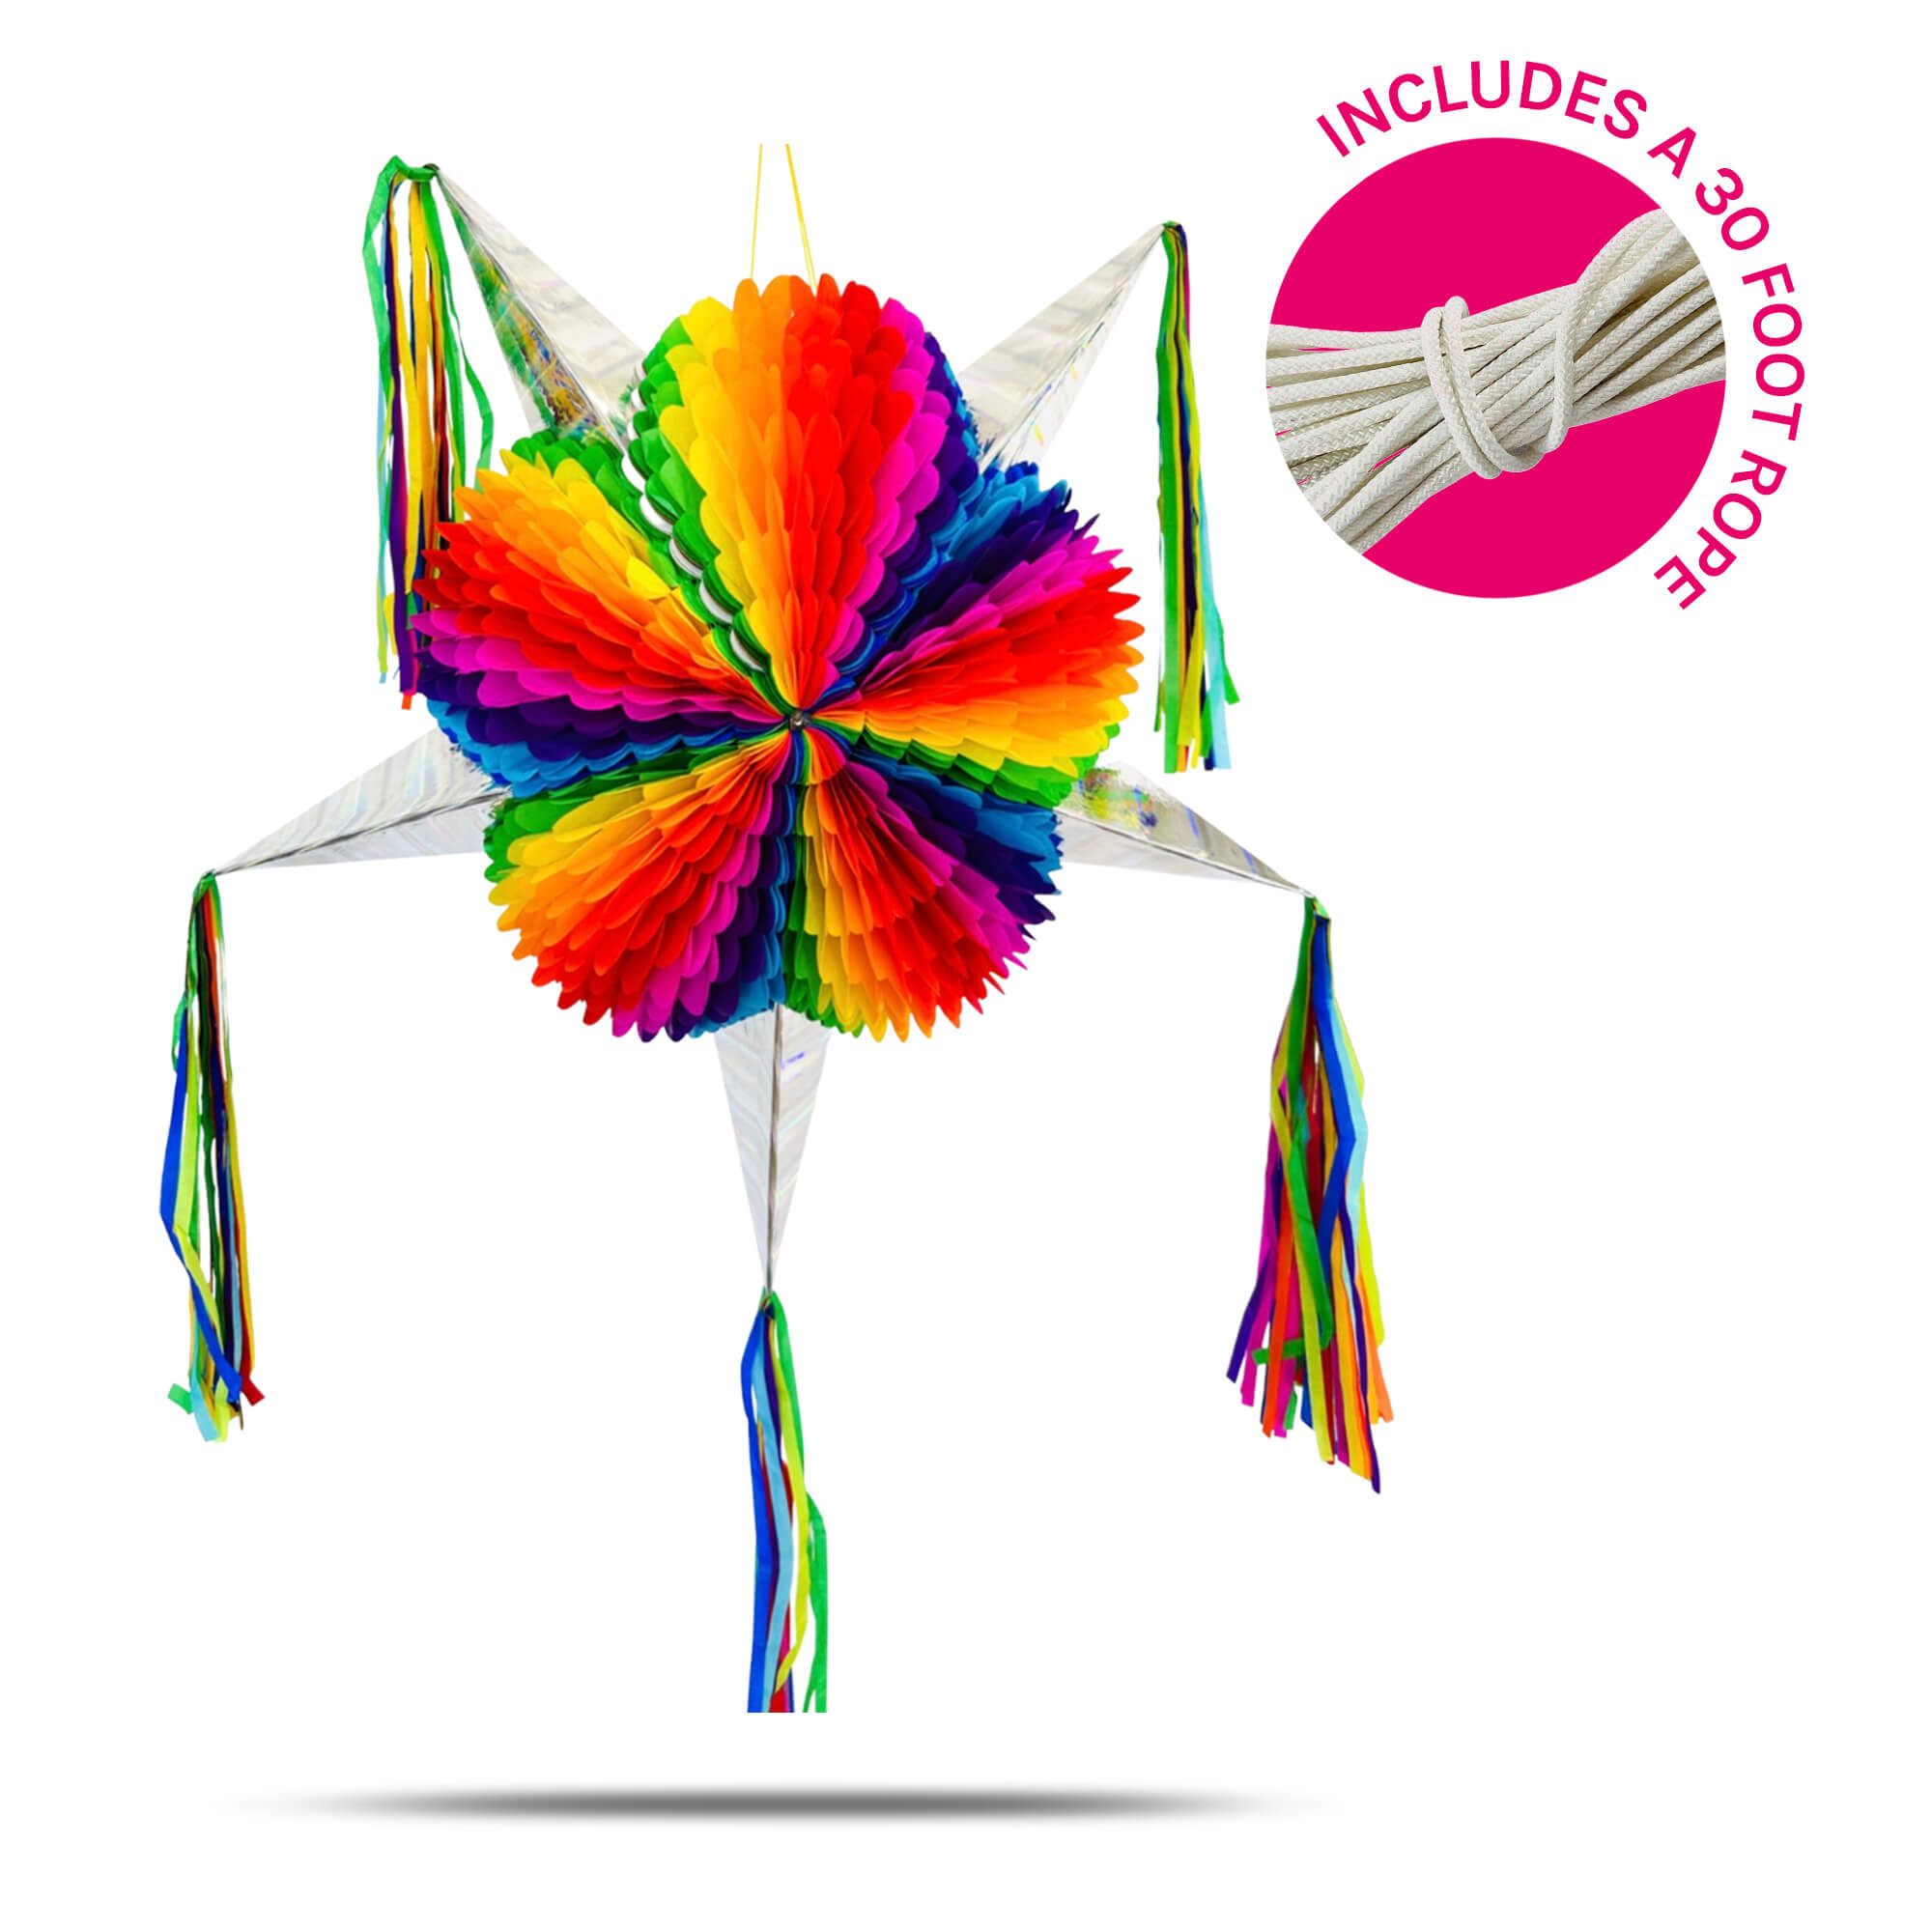 Jumbo Rainbow Mexican Star Piñata with 30 Ft Rope Included, Holds 5 Pounds  of Pinata Filler